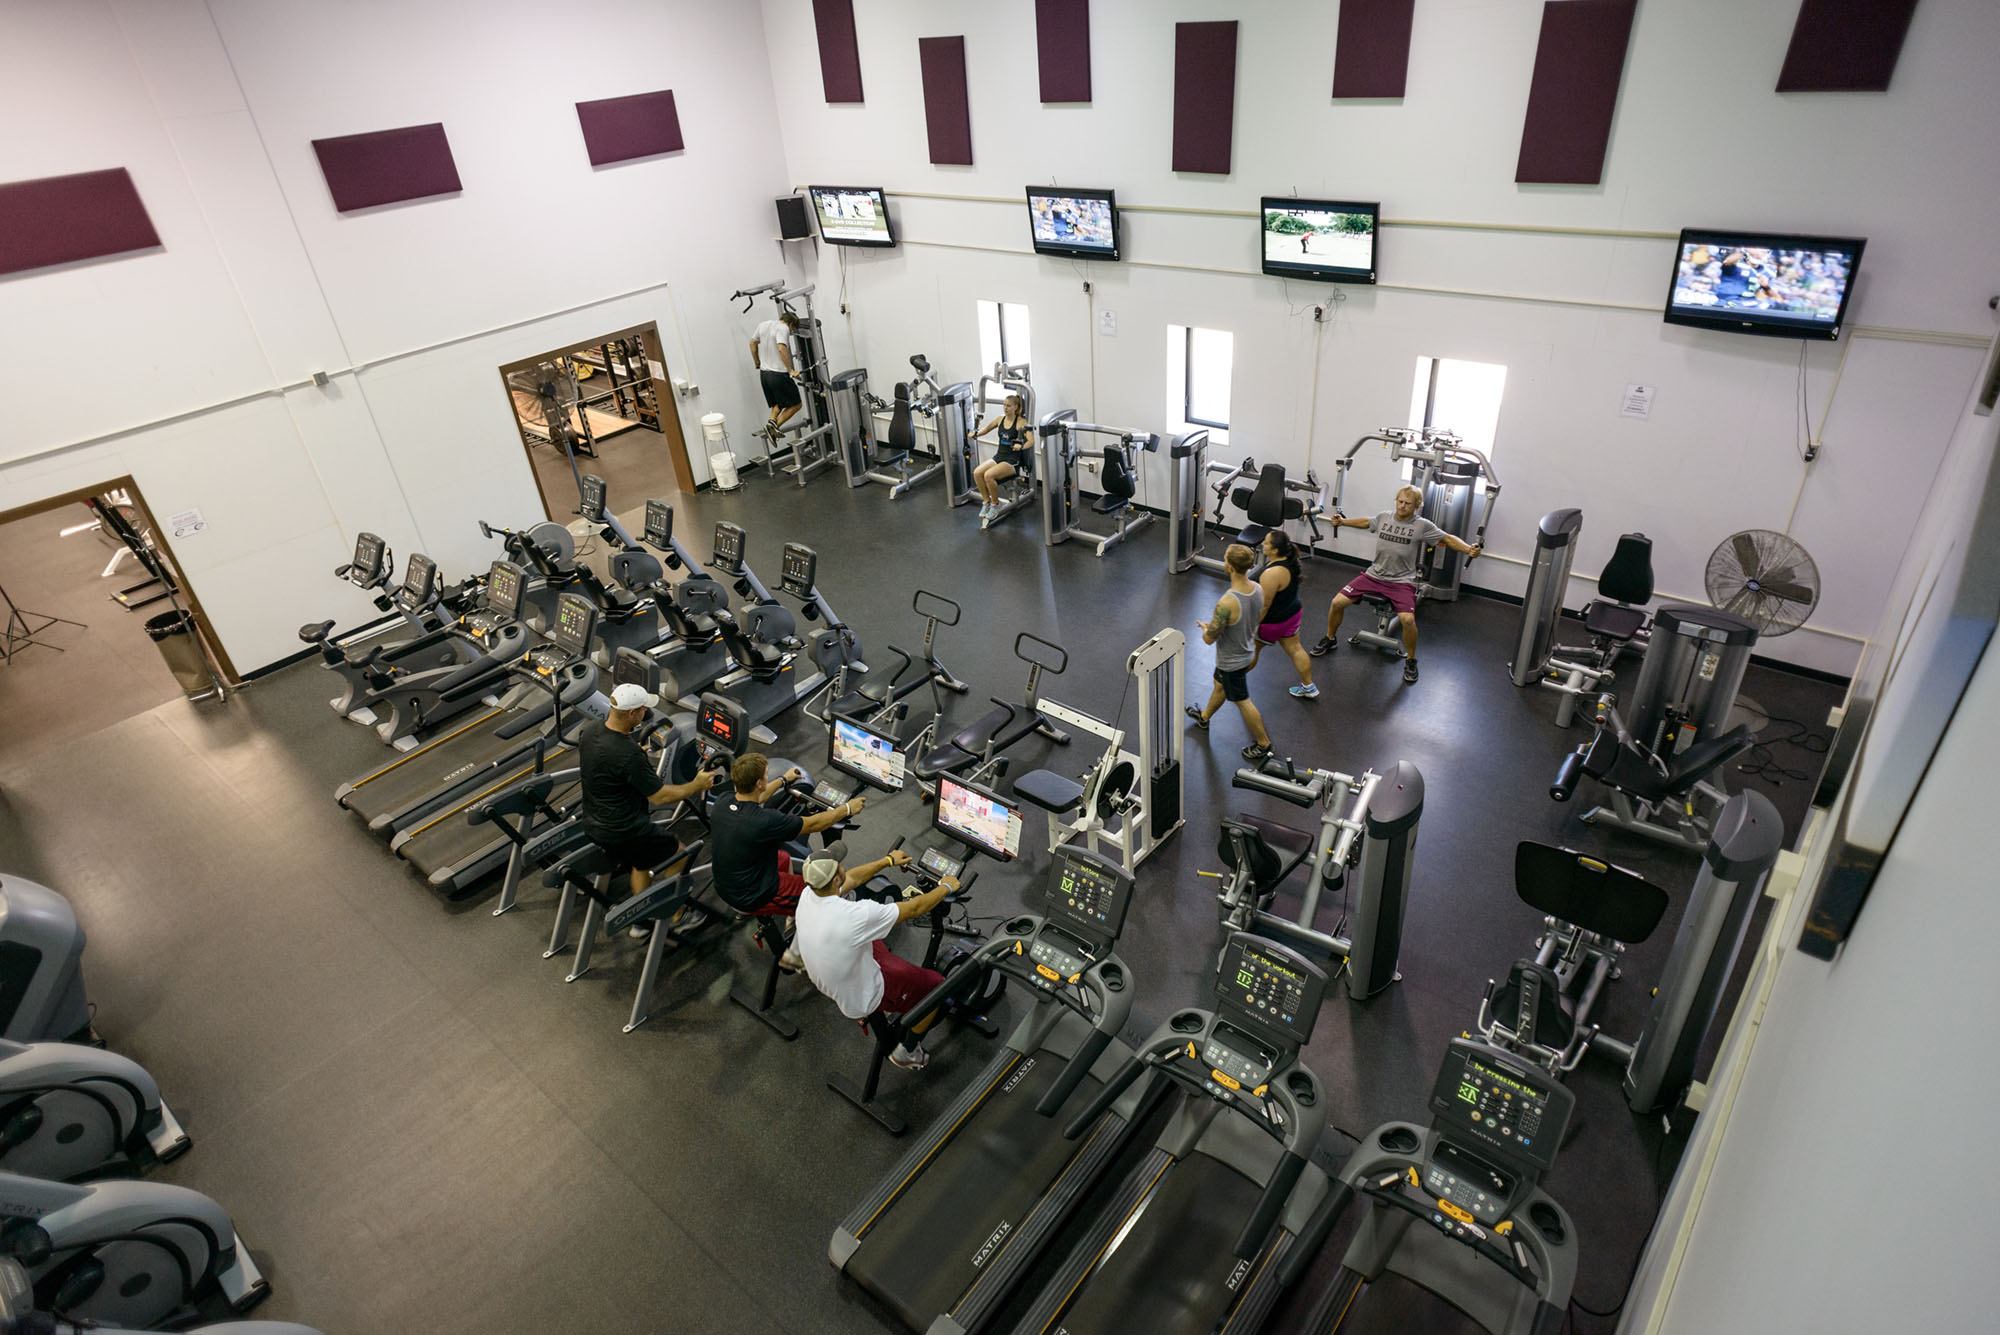 Photo of the exercise equipment at the NPAC